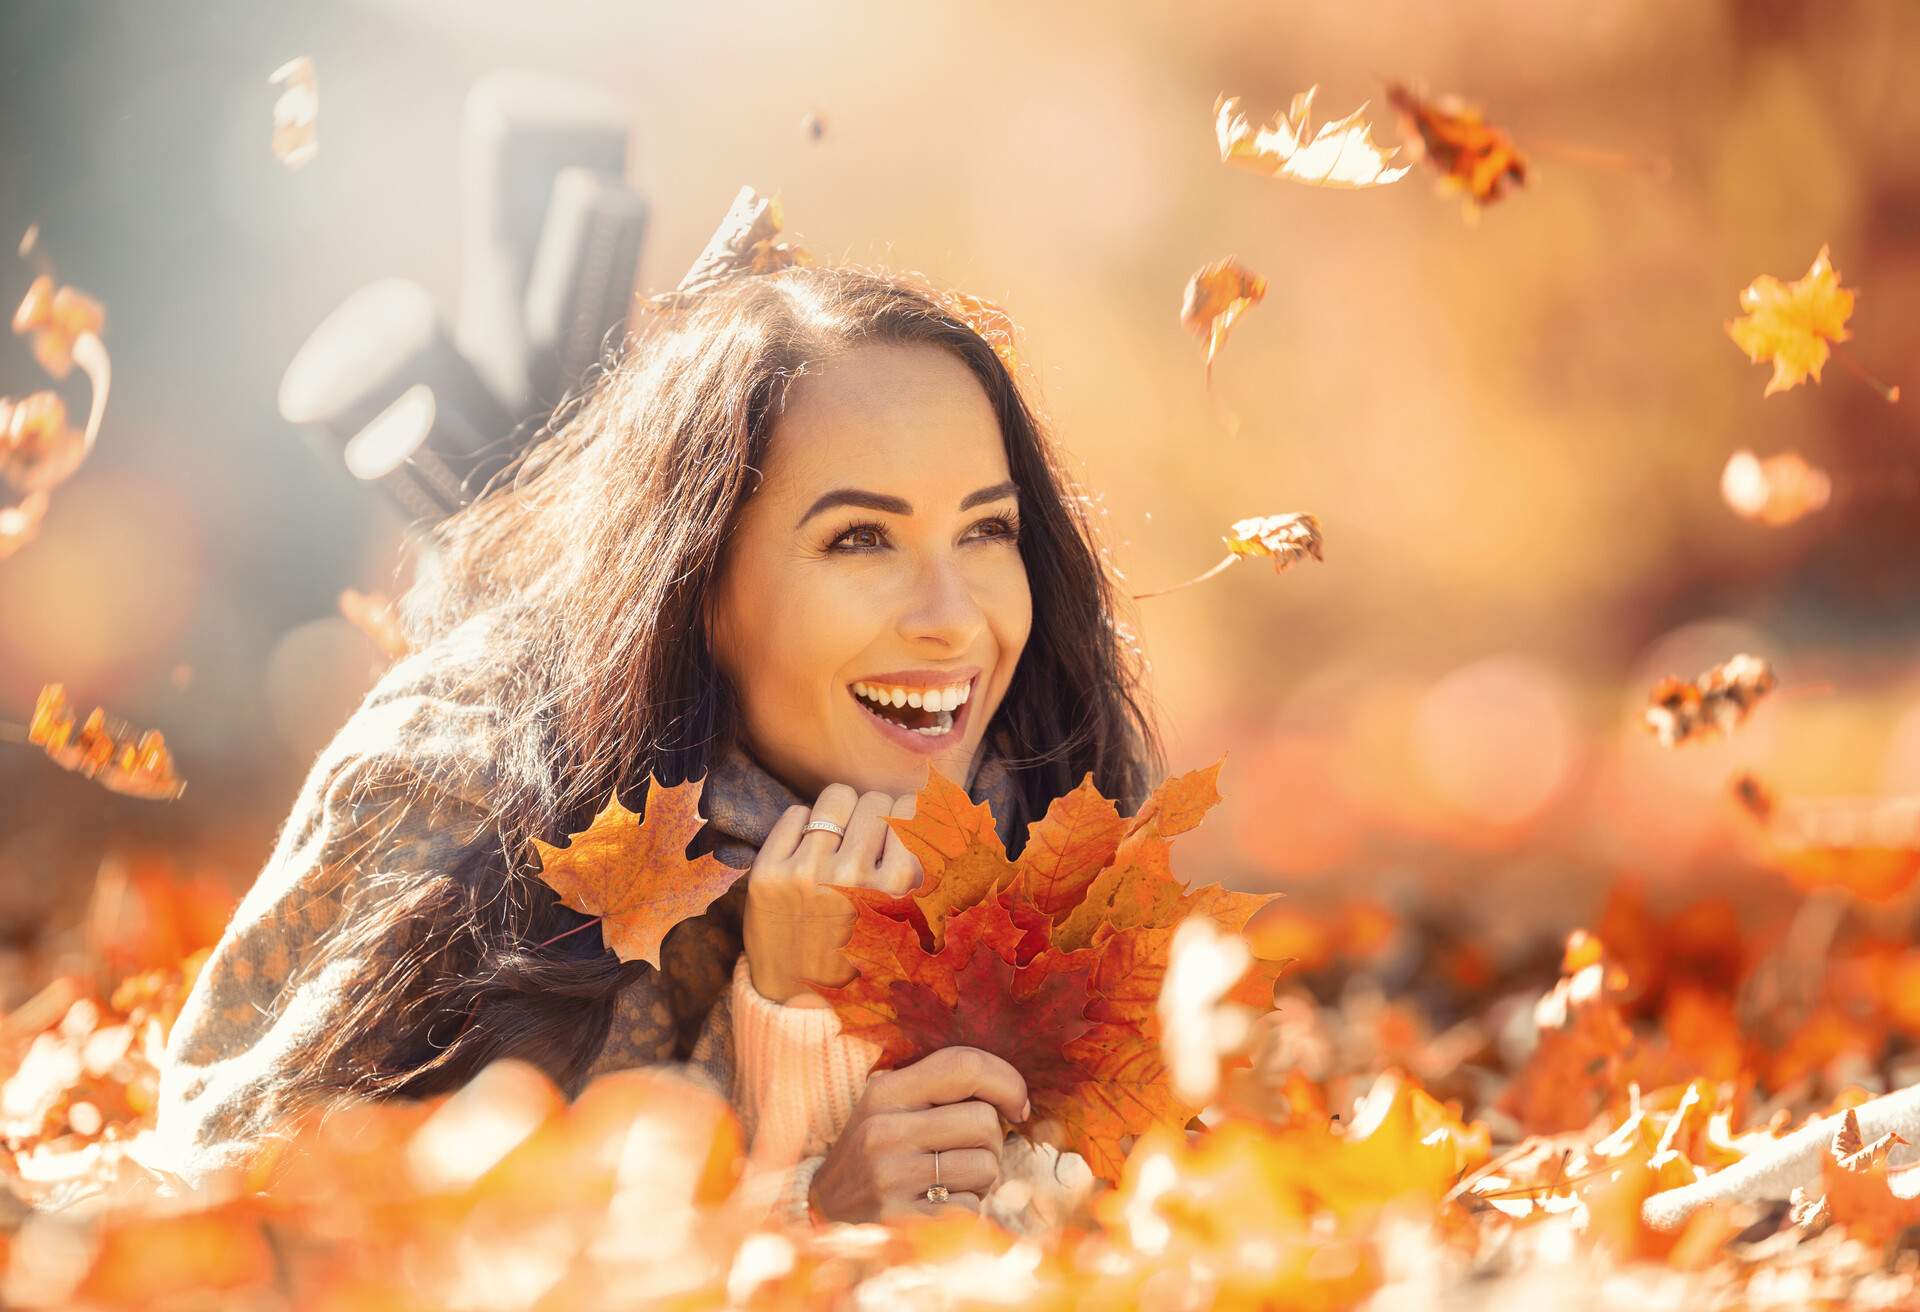 theme_person_woman_autumn_leaves_gettyimages